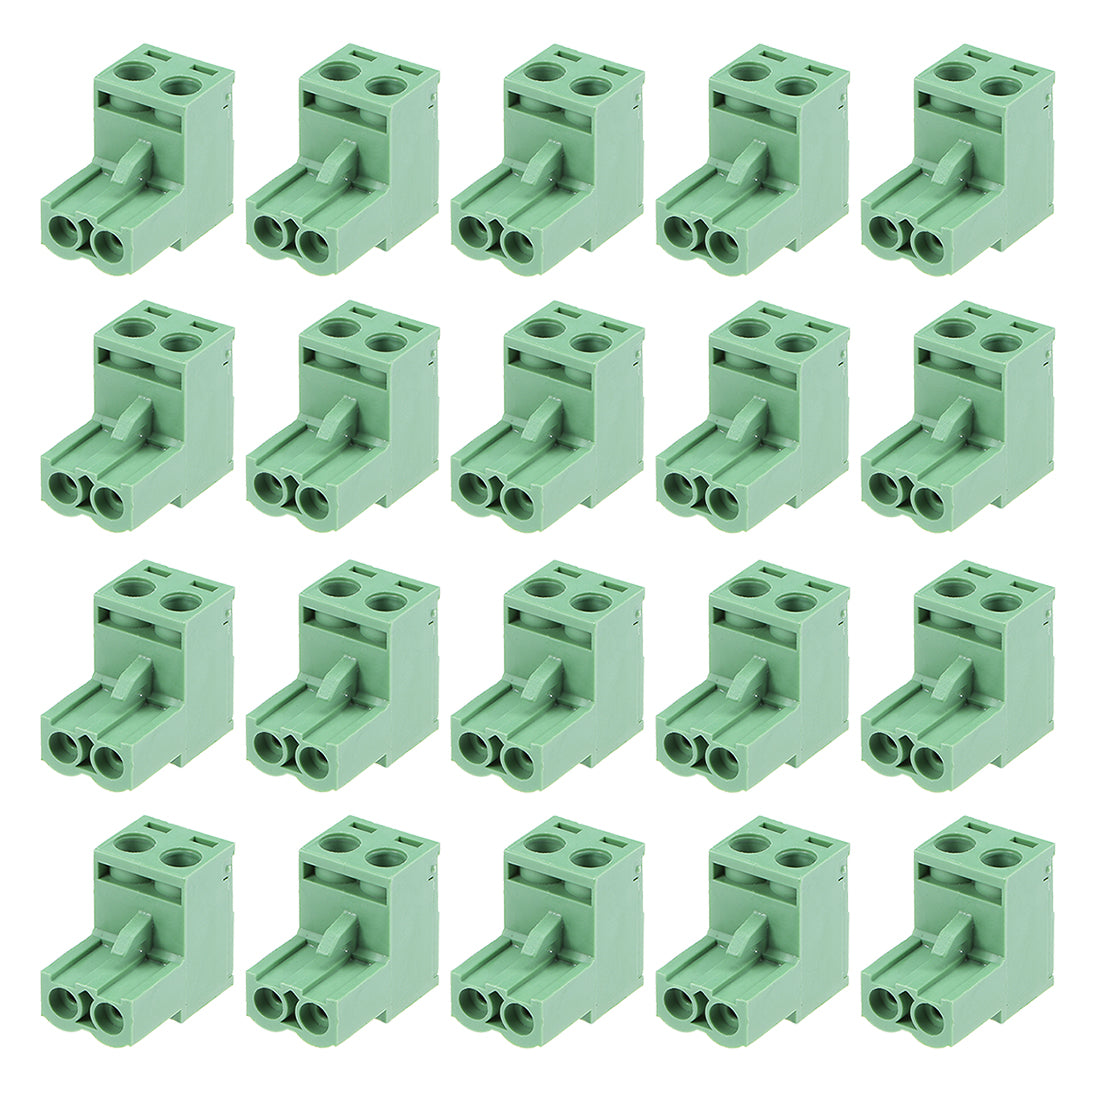 uxcell Uxcell 20Pcs AC300V 15A 5.08mm Pitch 2P Flat Angle Needle Seat Insert-In PCB Terminal Block Connector green